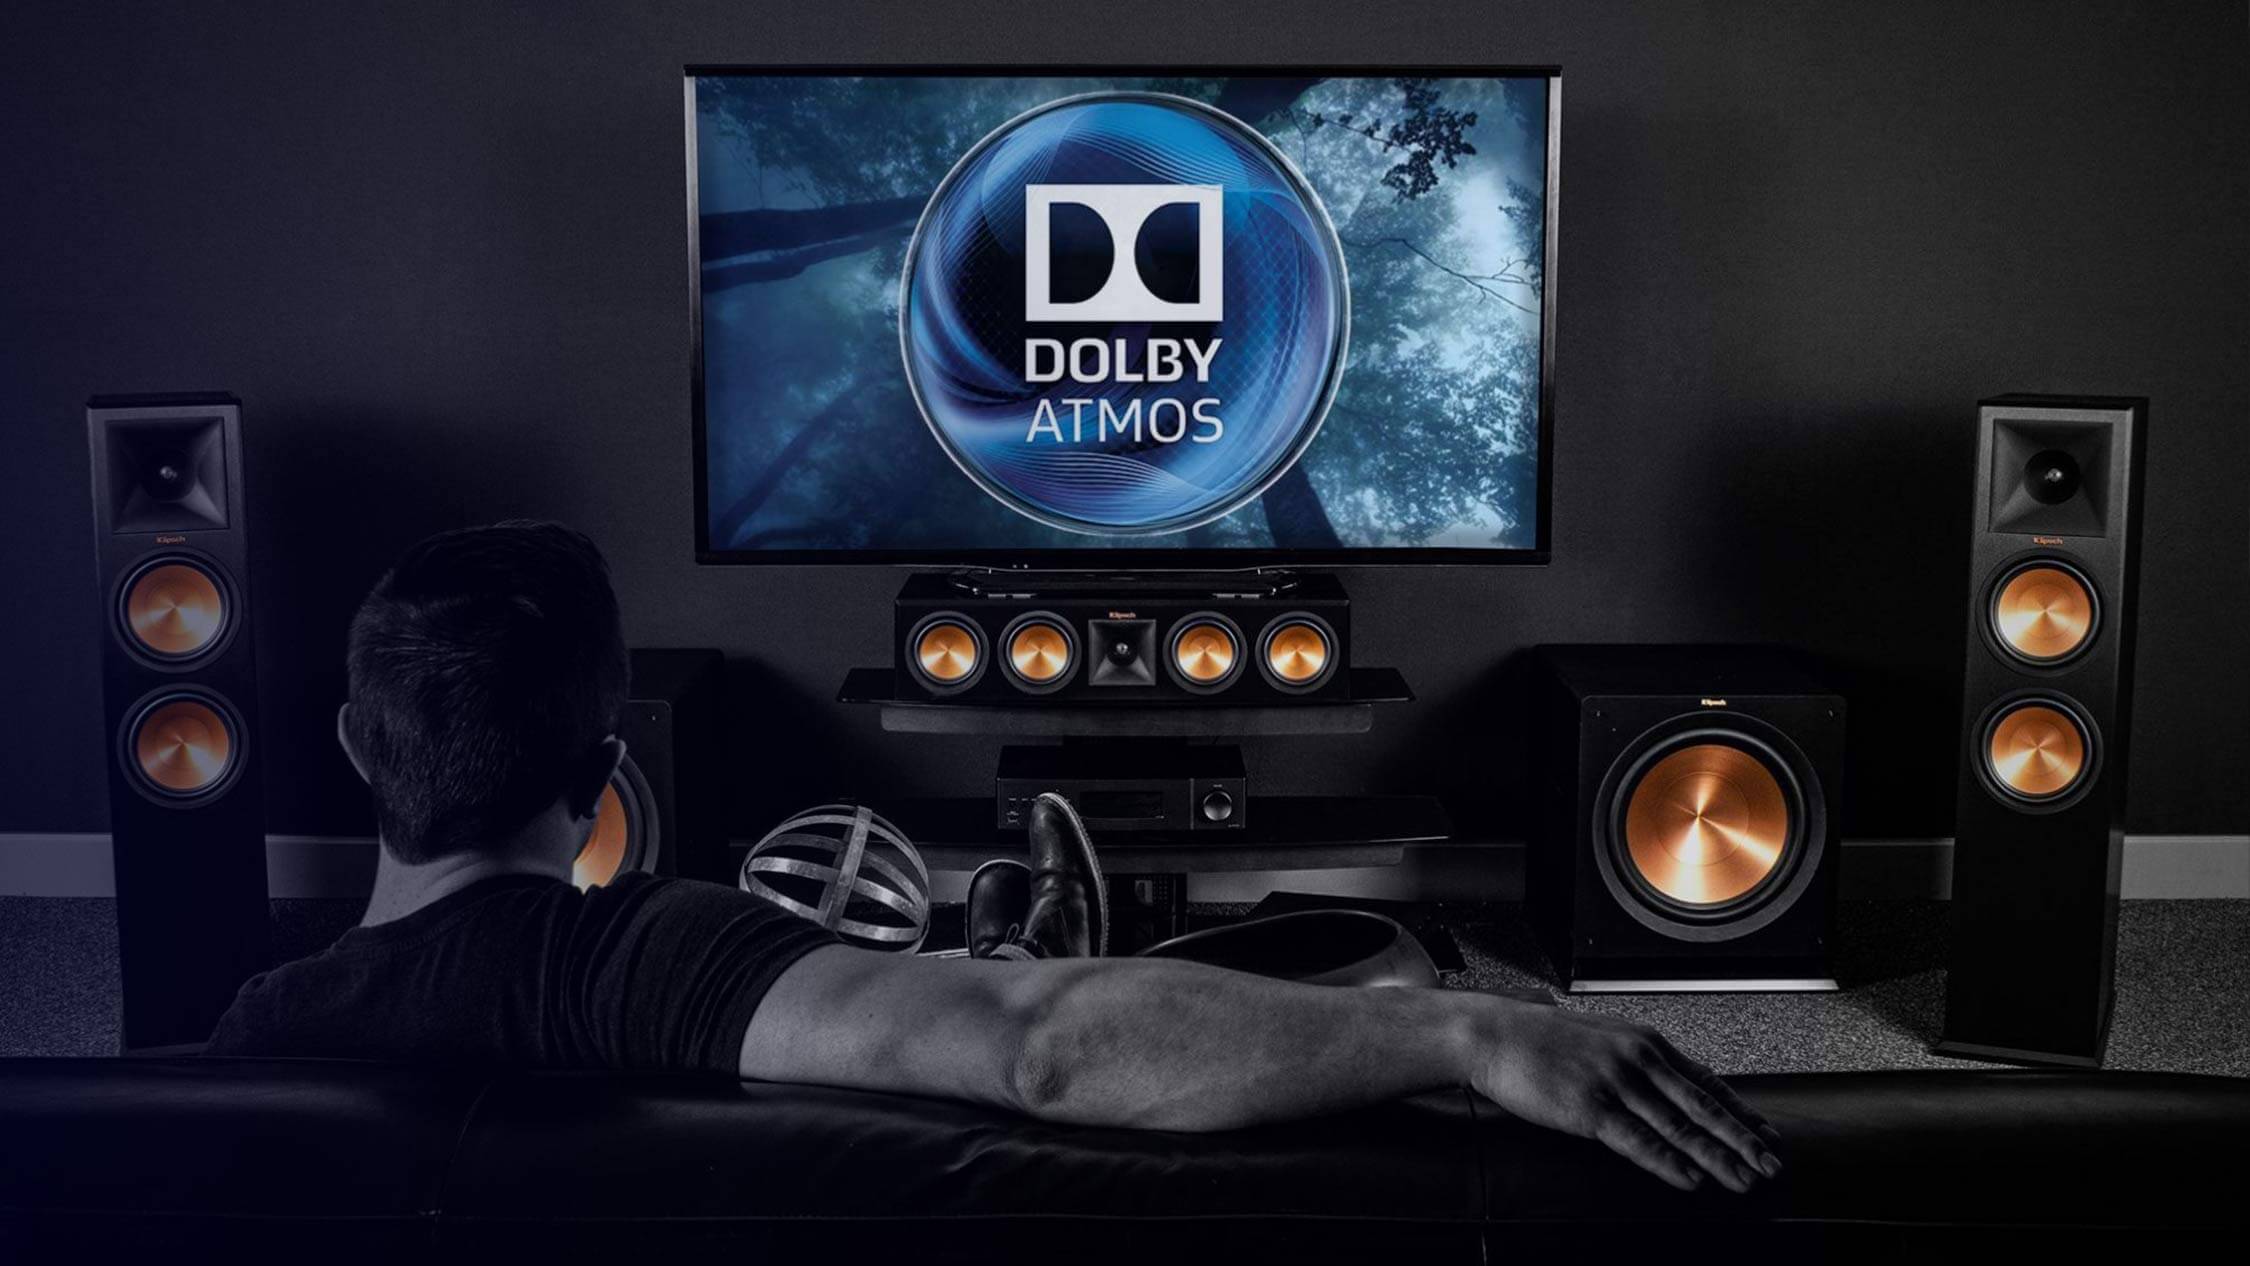 are-you-really-getting-dolby-atmos-sound